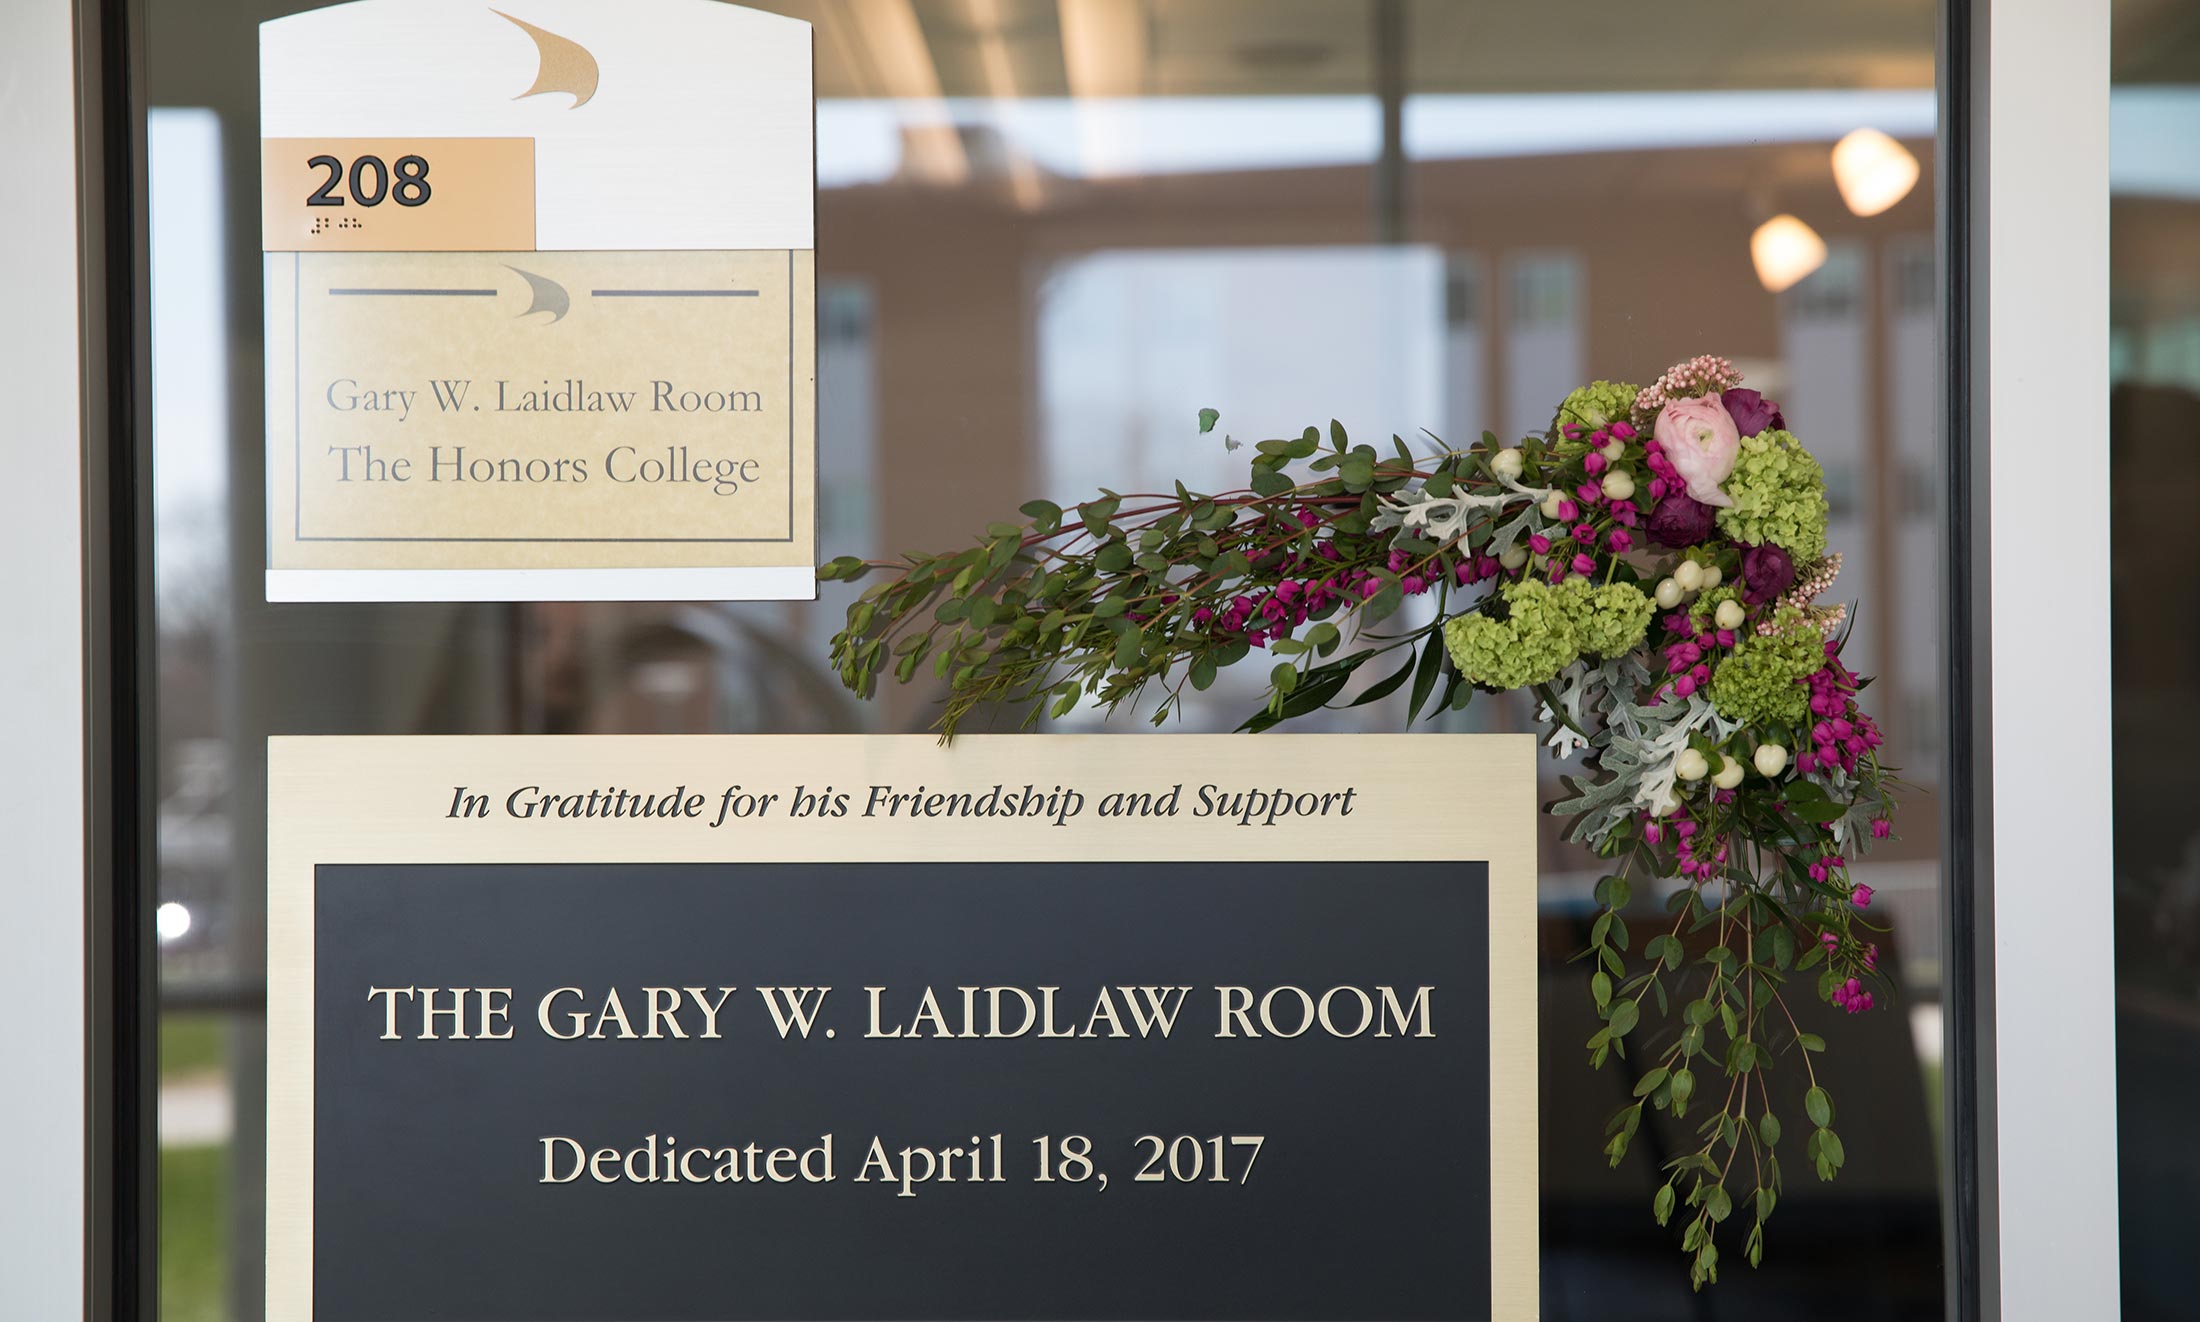 Gary Laidlaw room in the Oakland University Honors College